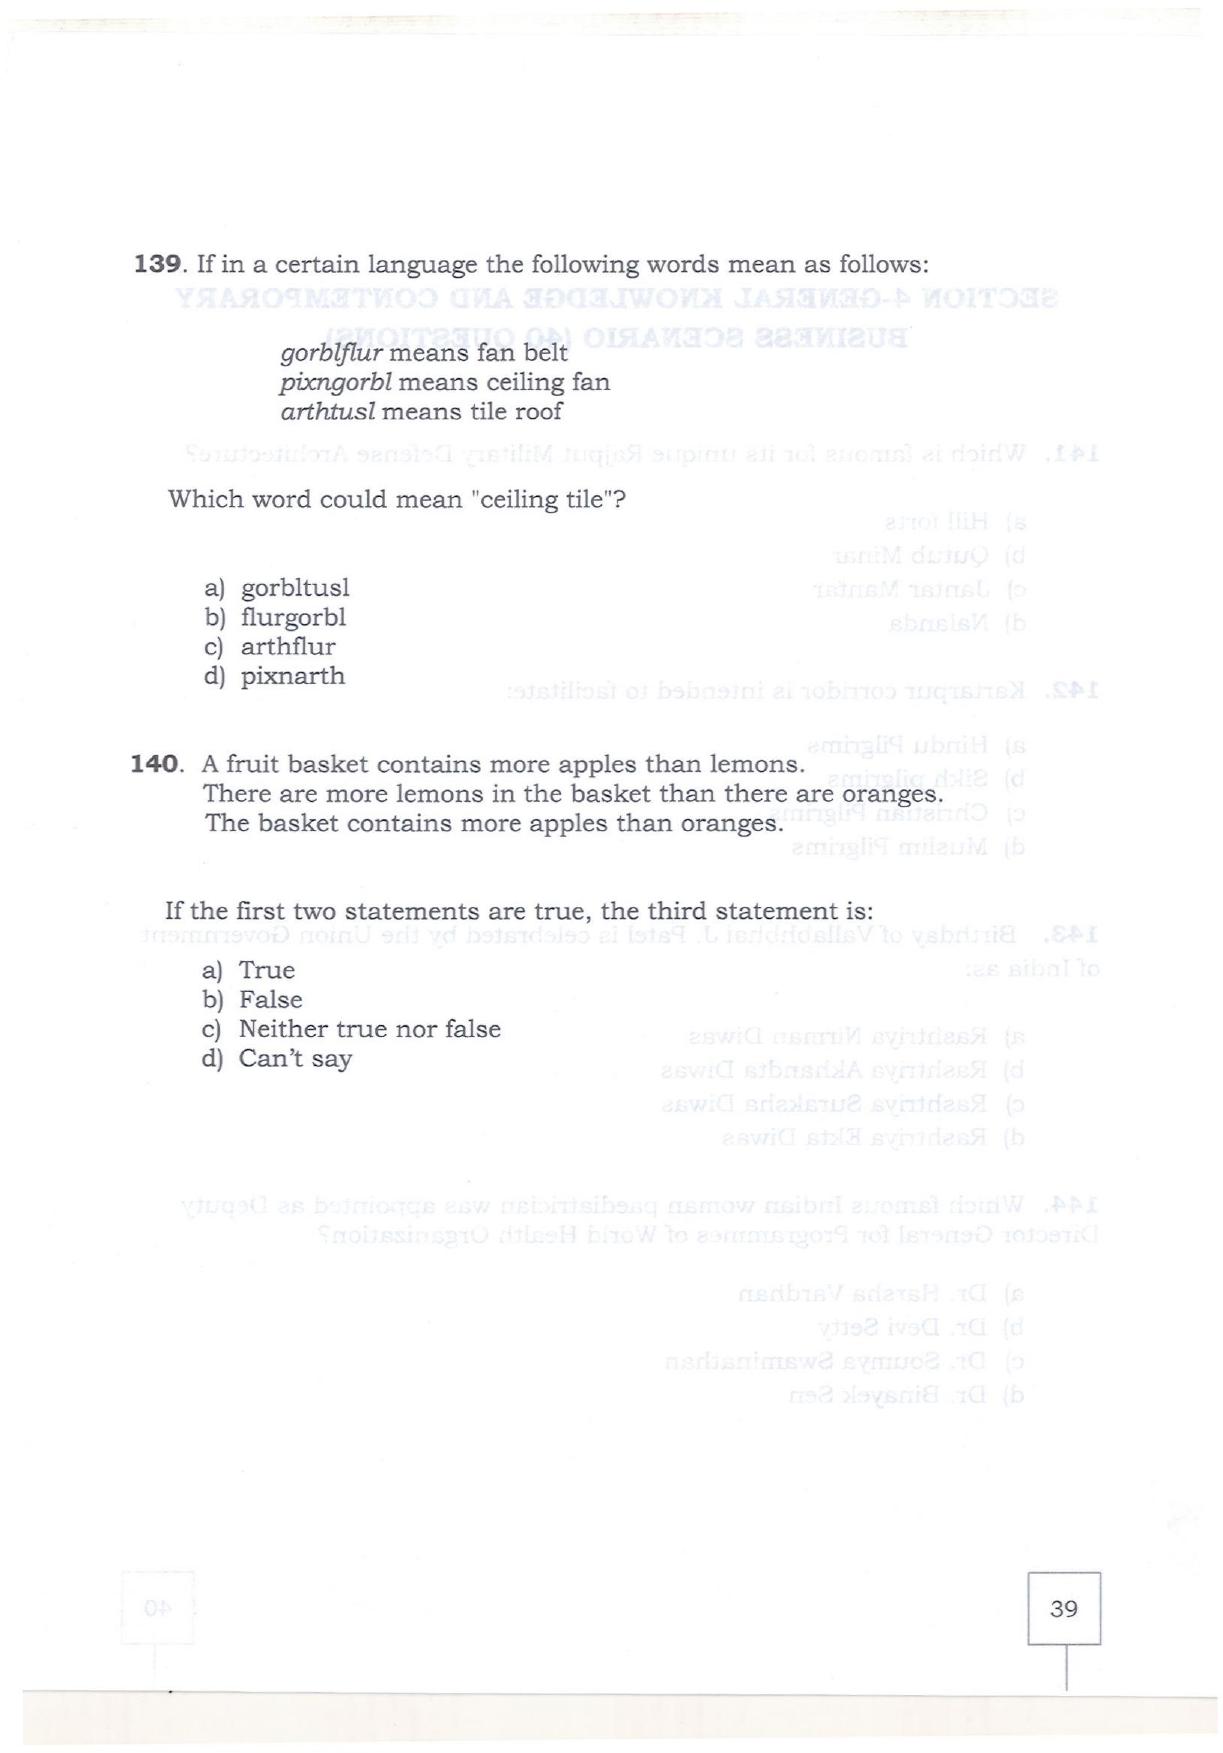 KMAT Question Papers - February 2019 - Page 37